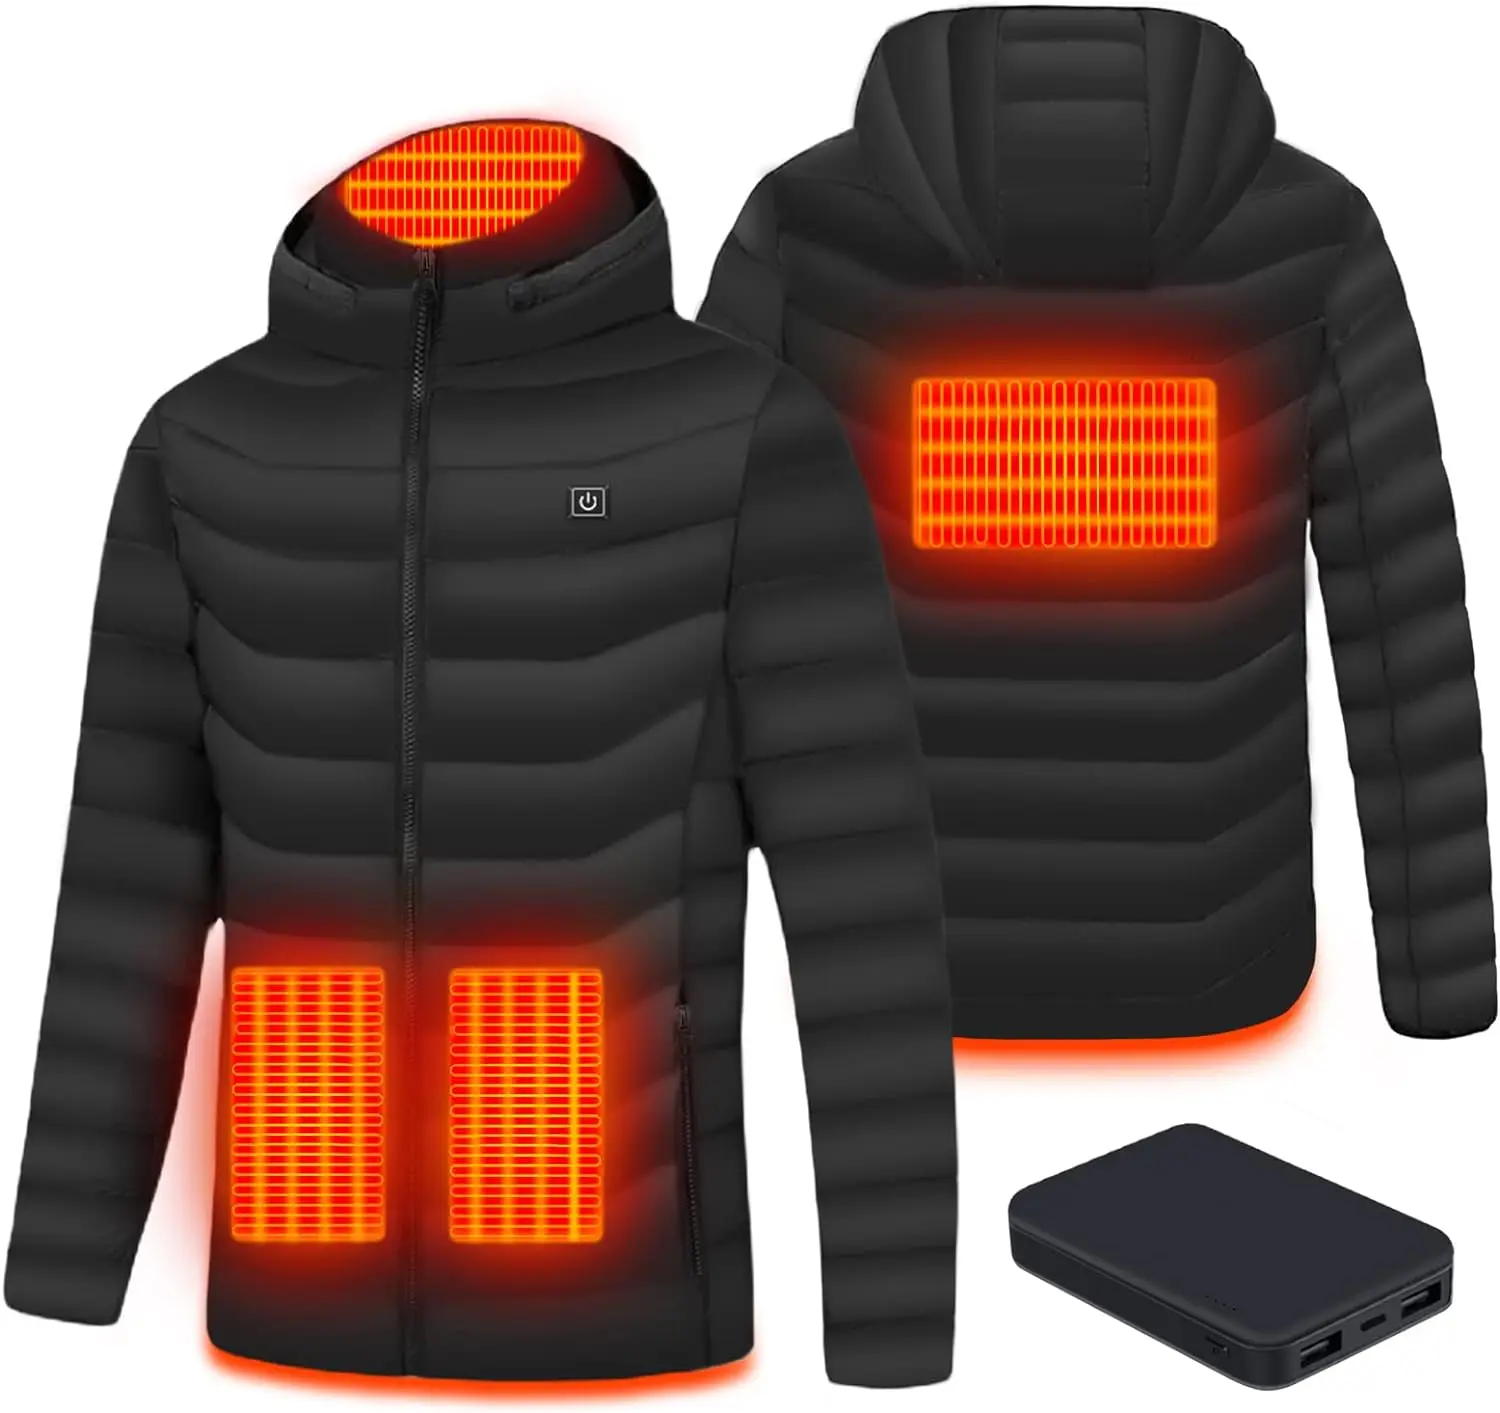 

Jacket with 10000mAh Battery Pack,Lightweight Heating Jacket with 3 Heating Levels 4 Heating Zones,Washable Heated Coat for Men